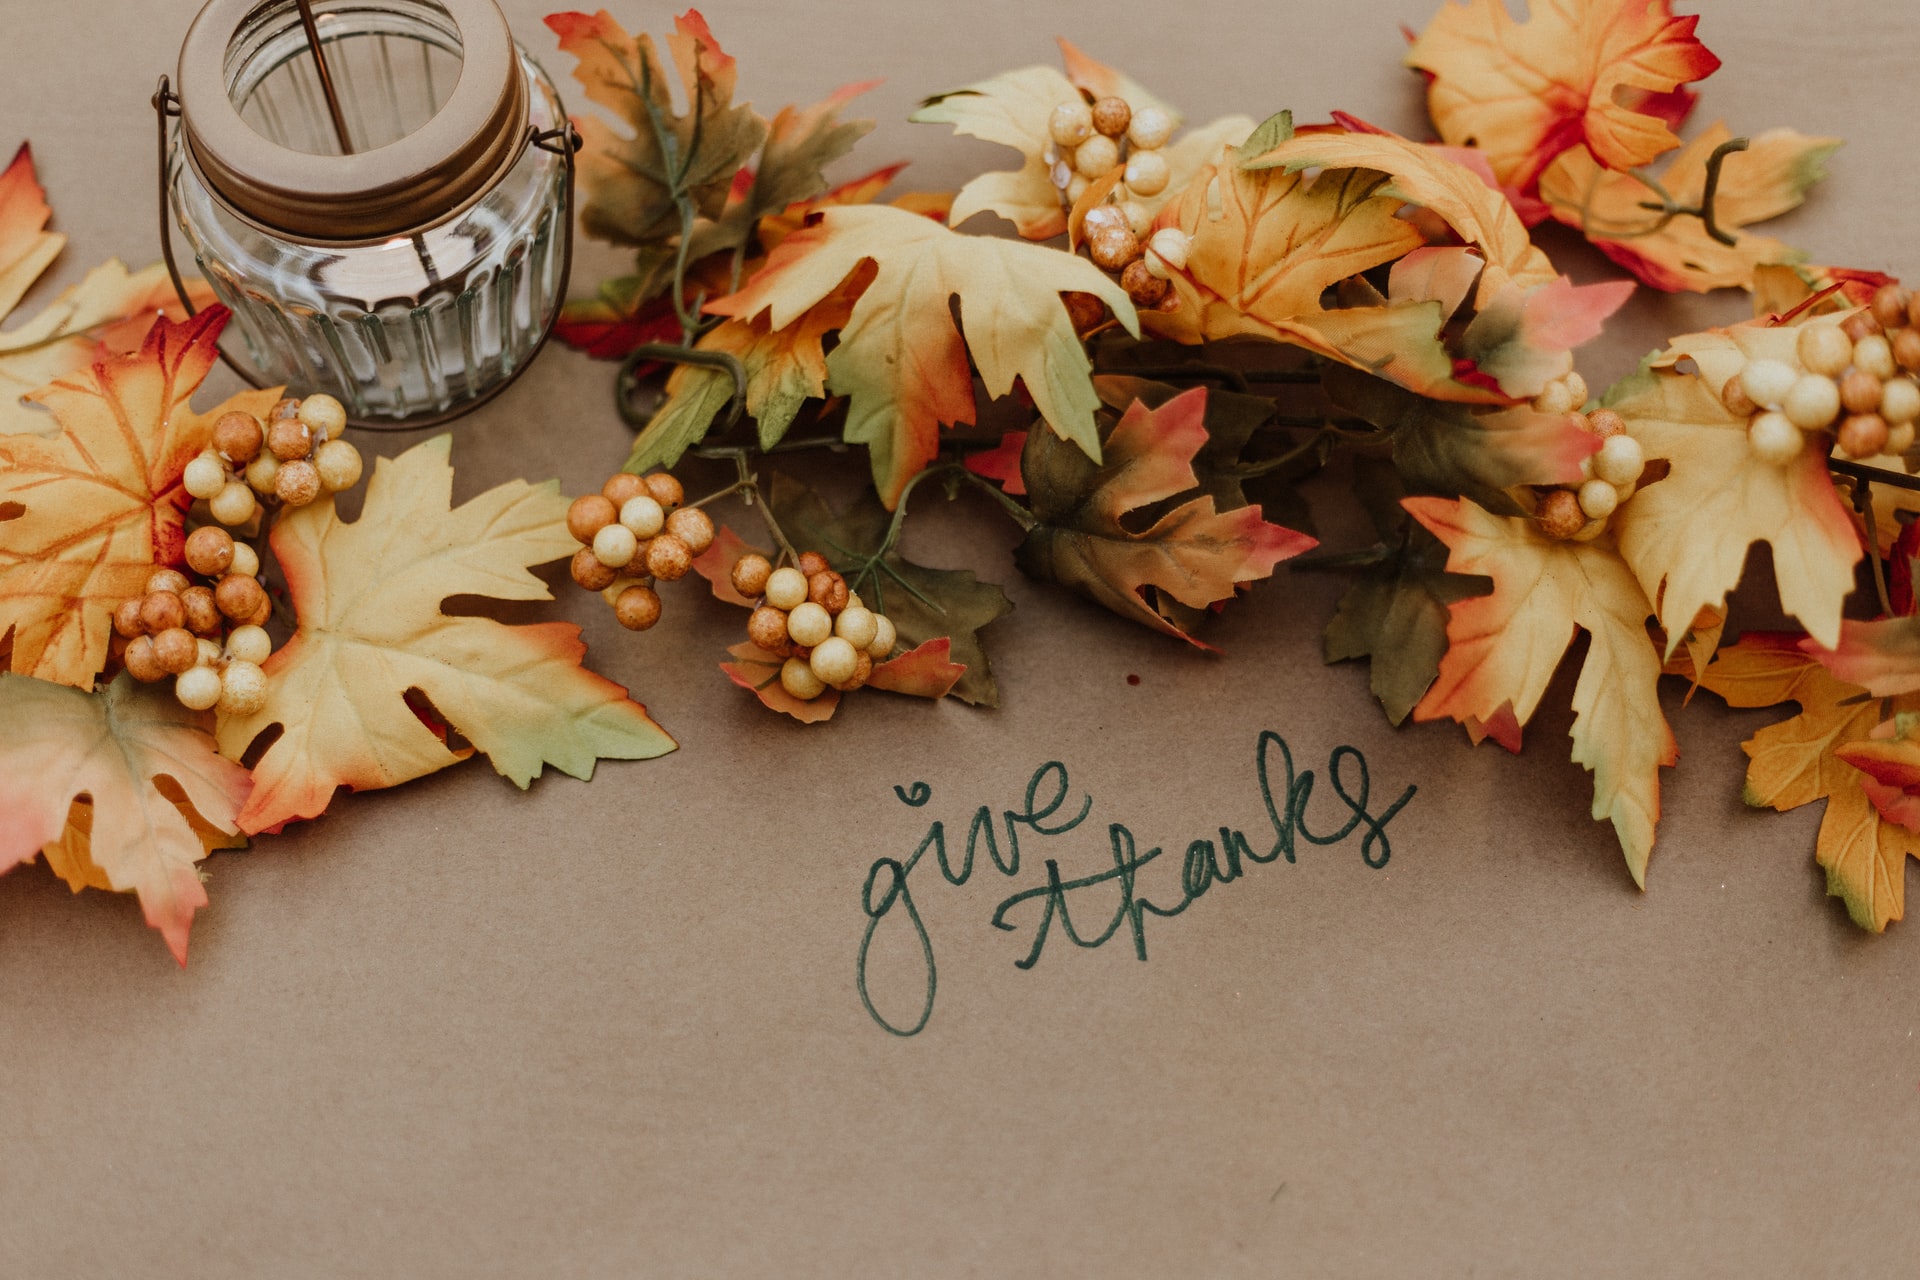 Fall leaves and candle holder on brown paper that says give thanks.